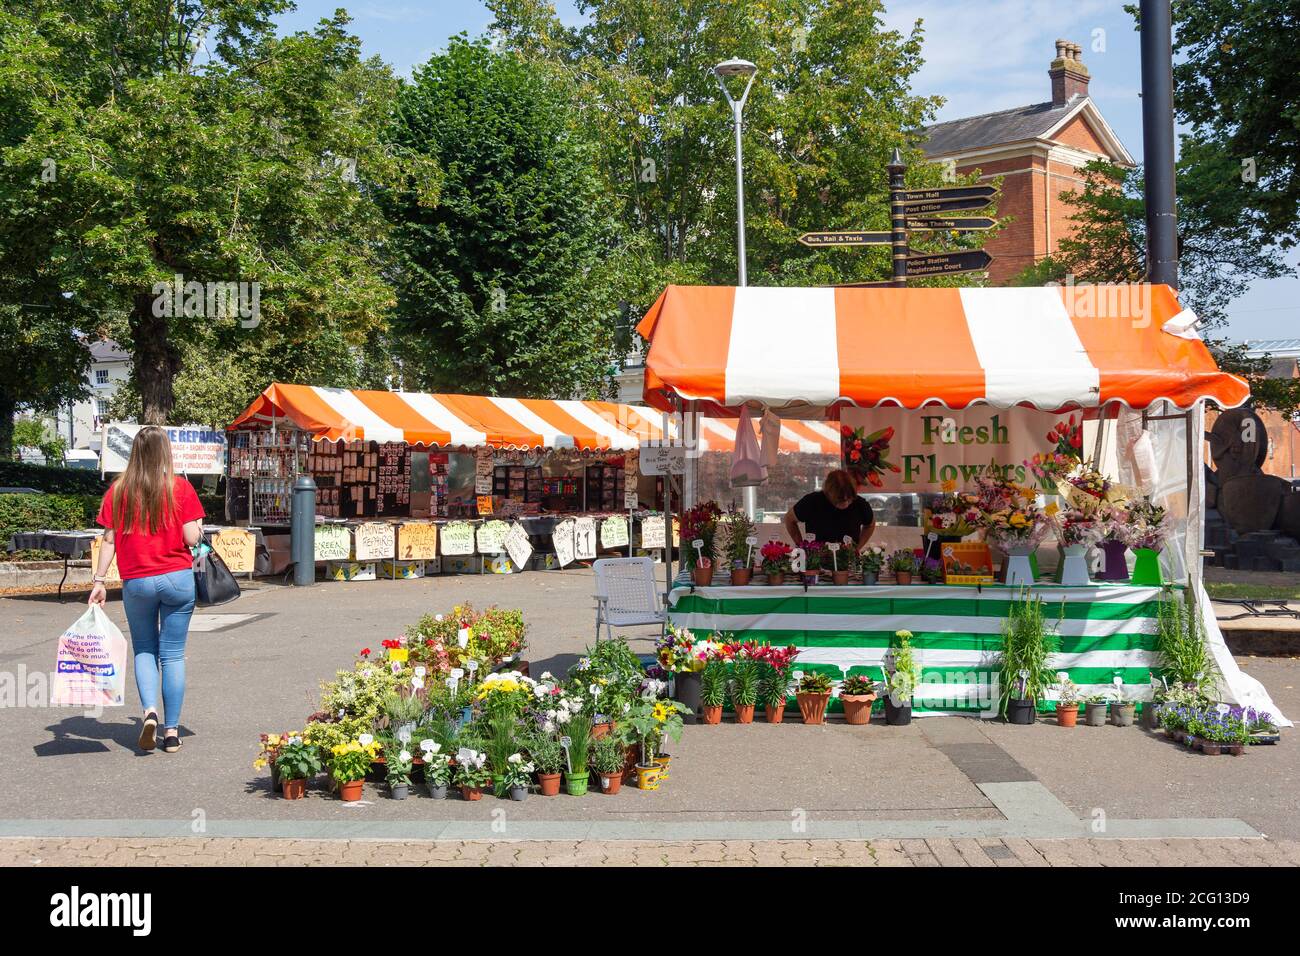 Fresh flowers stall in street market, Market Place, Redditch, Worcestershire, England, United Kingdom Stock Photo